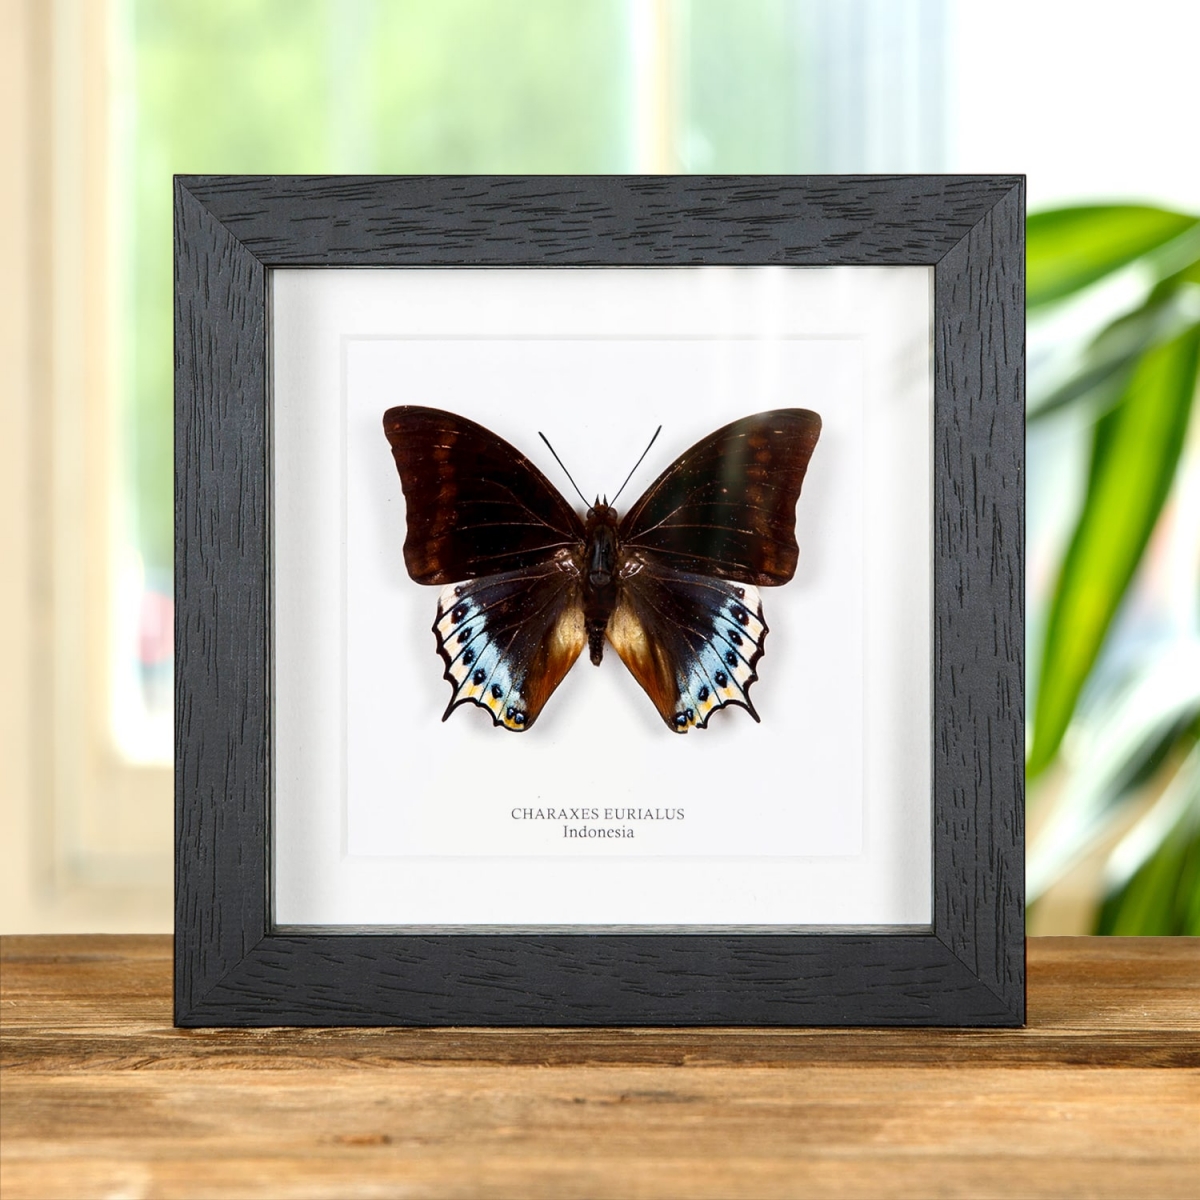 Minibeast Charaxes eurialus In Box Frame From Indonesia